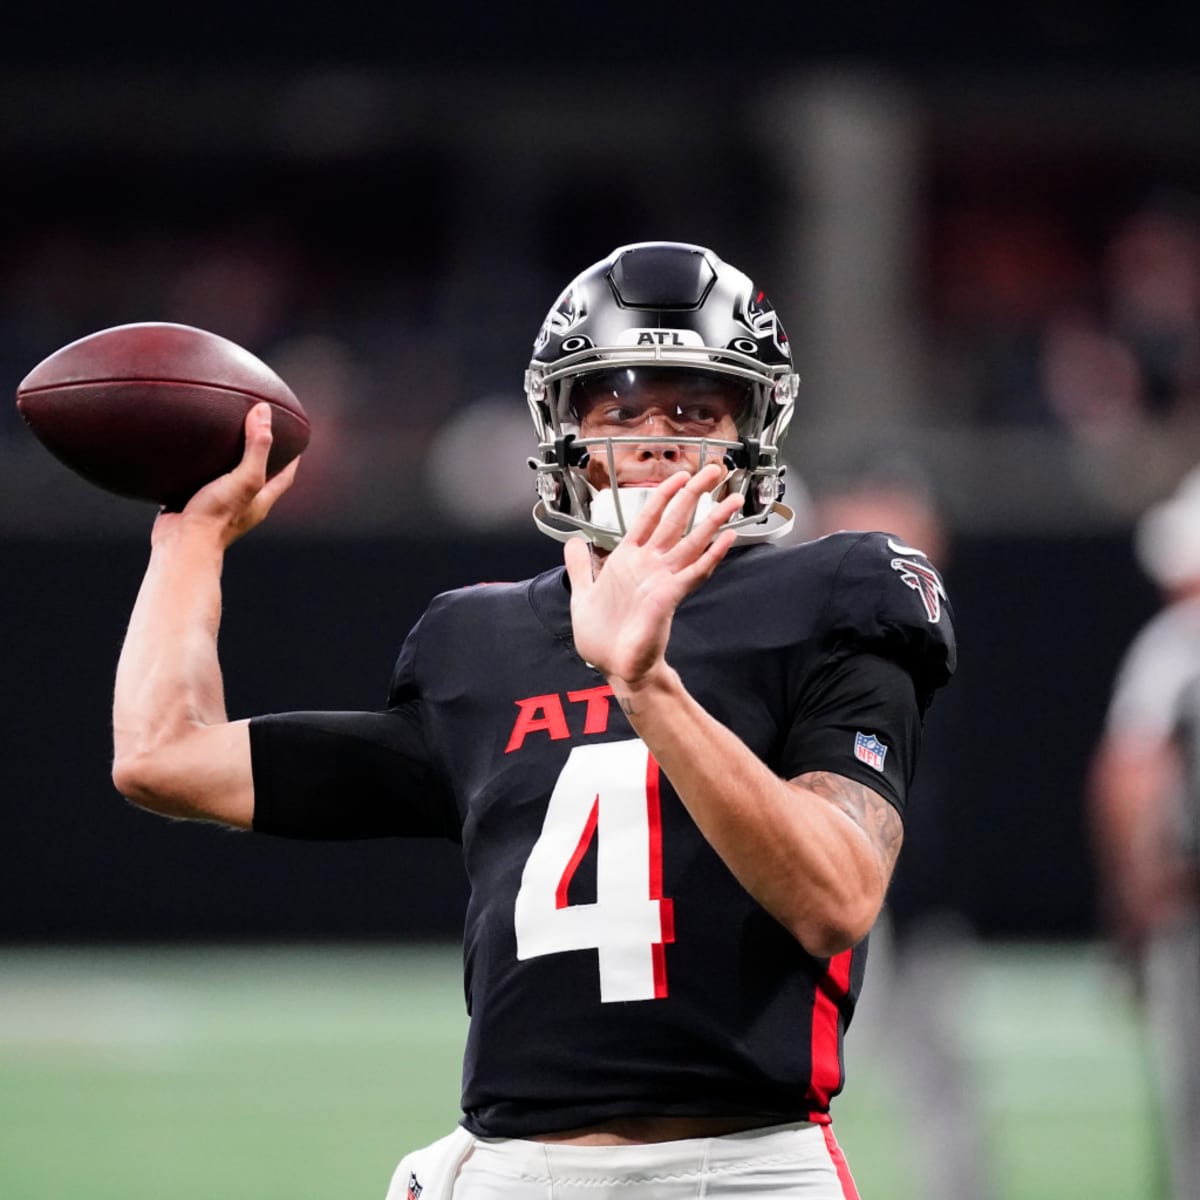 Marcus Mariota left Falcons after being benched for Desmond Ridder